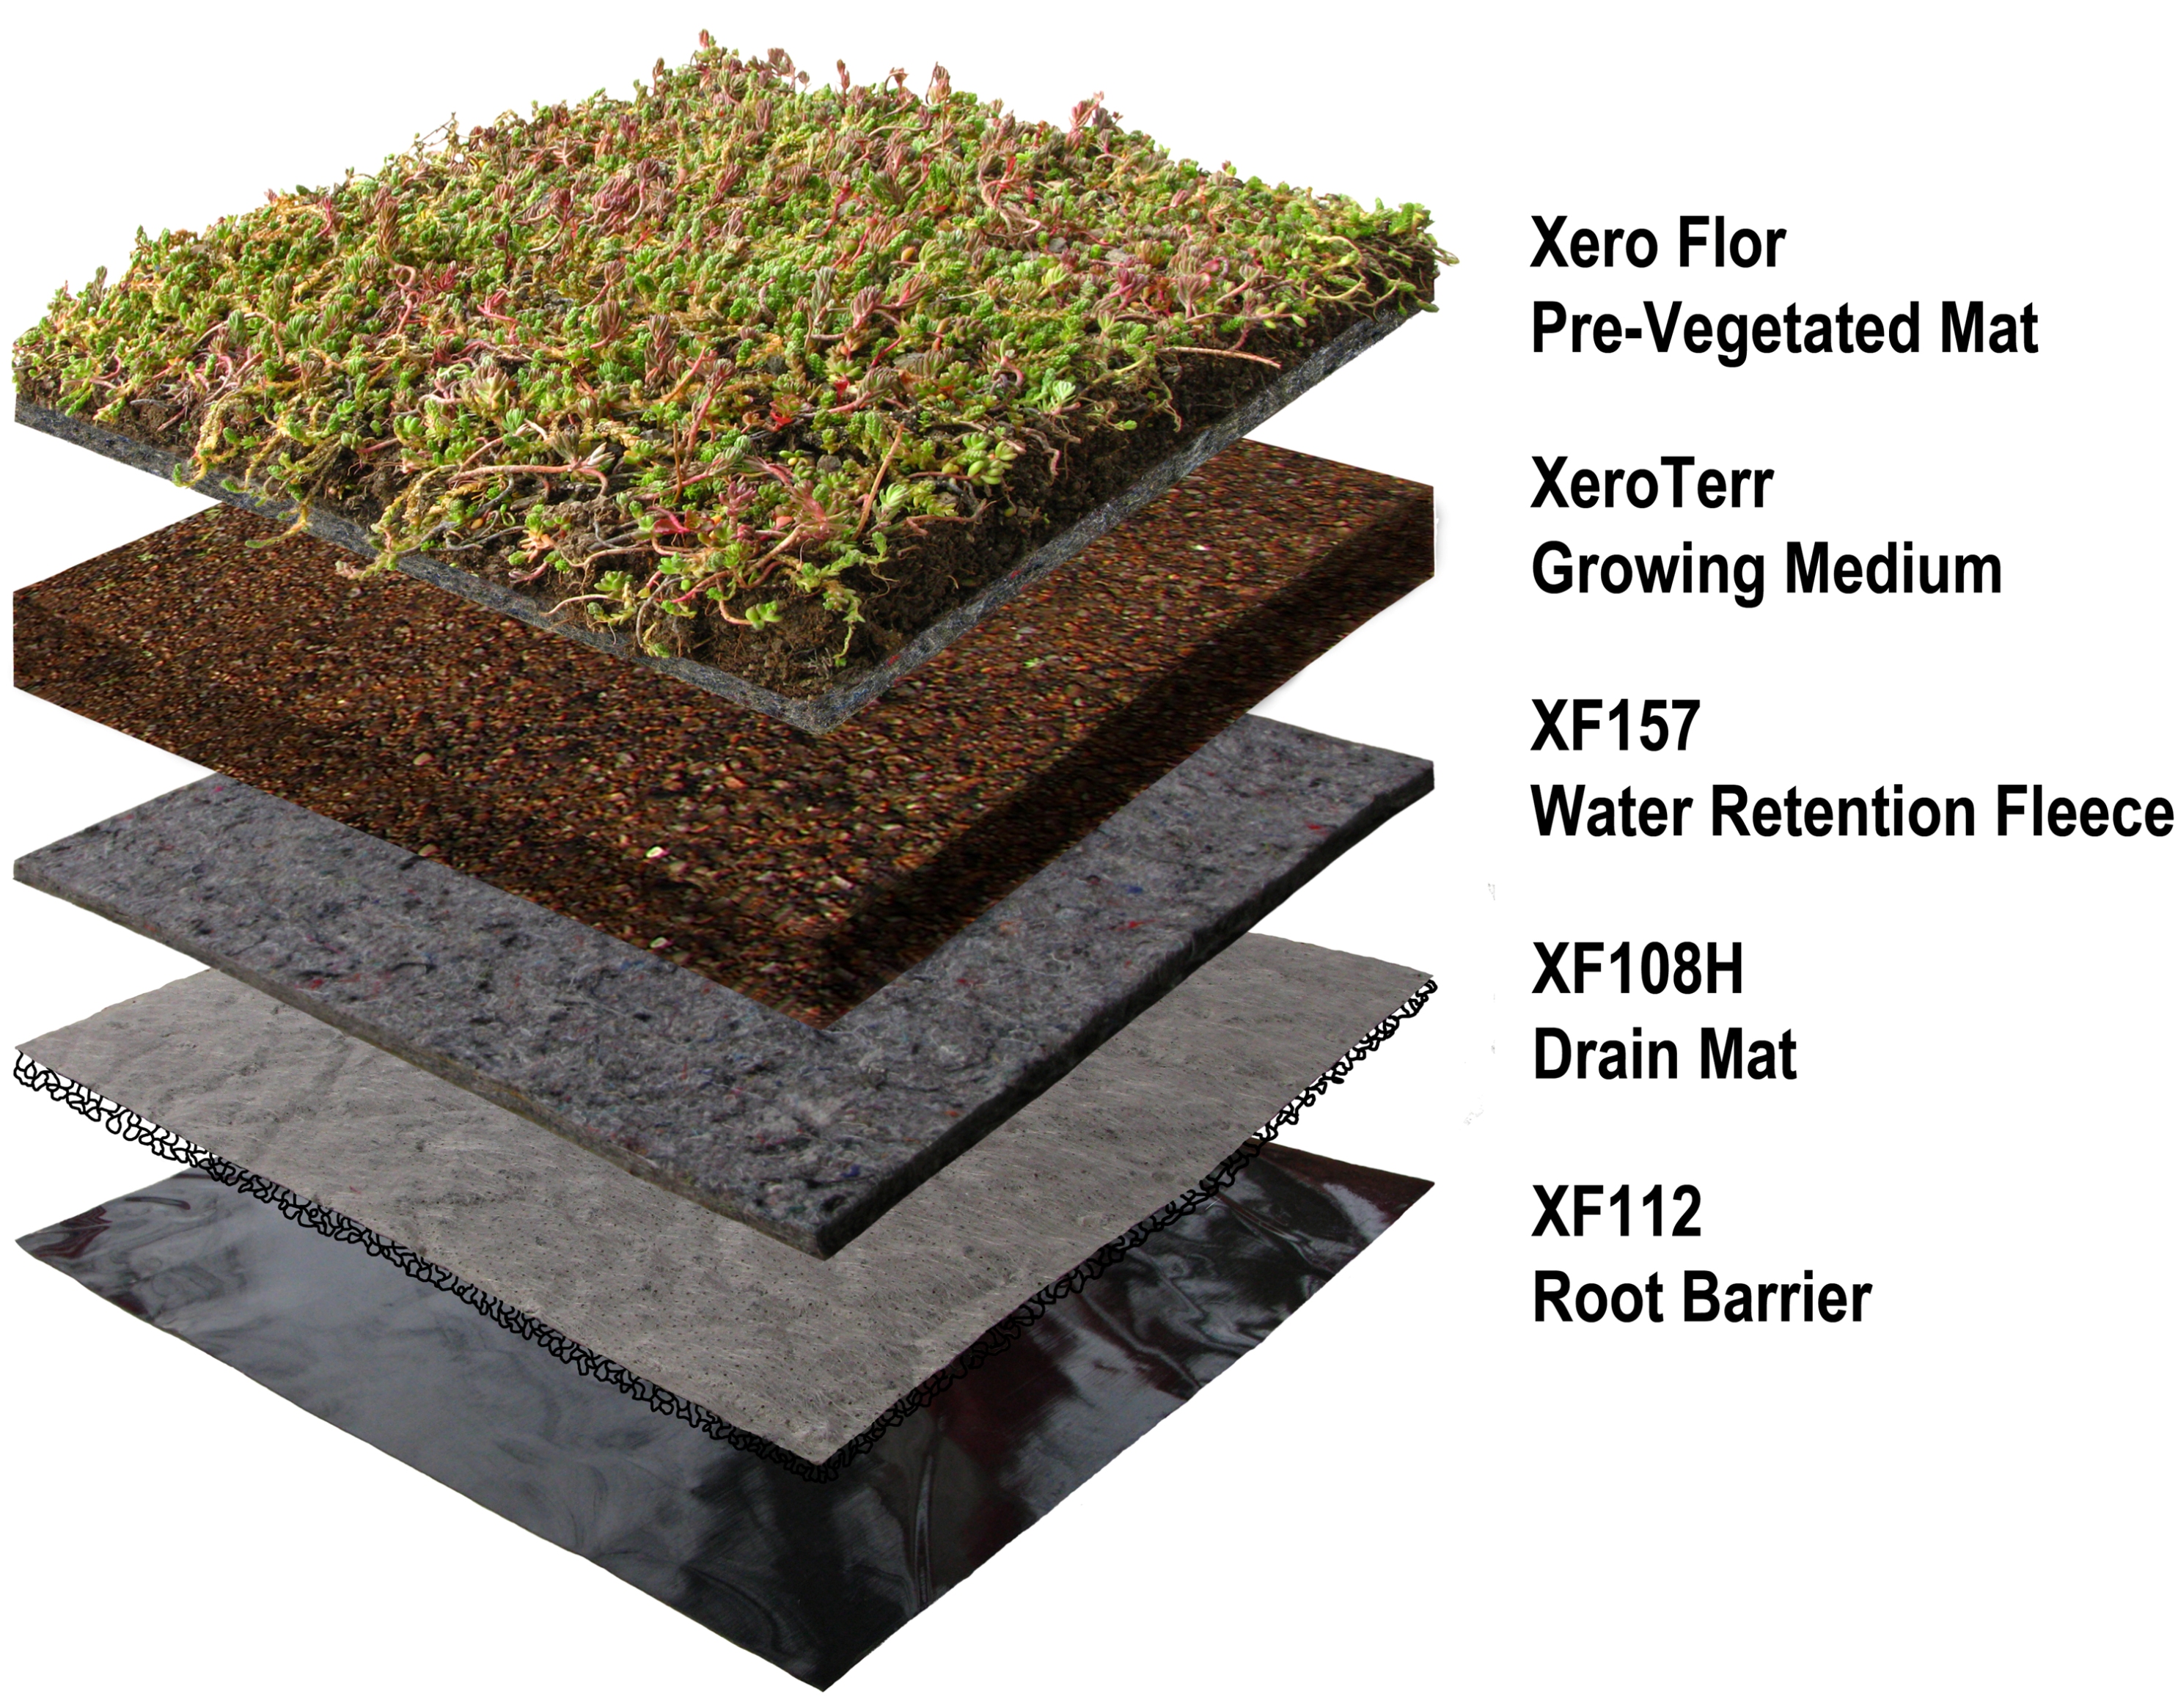 Xero Flor Green Roof System